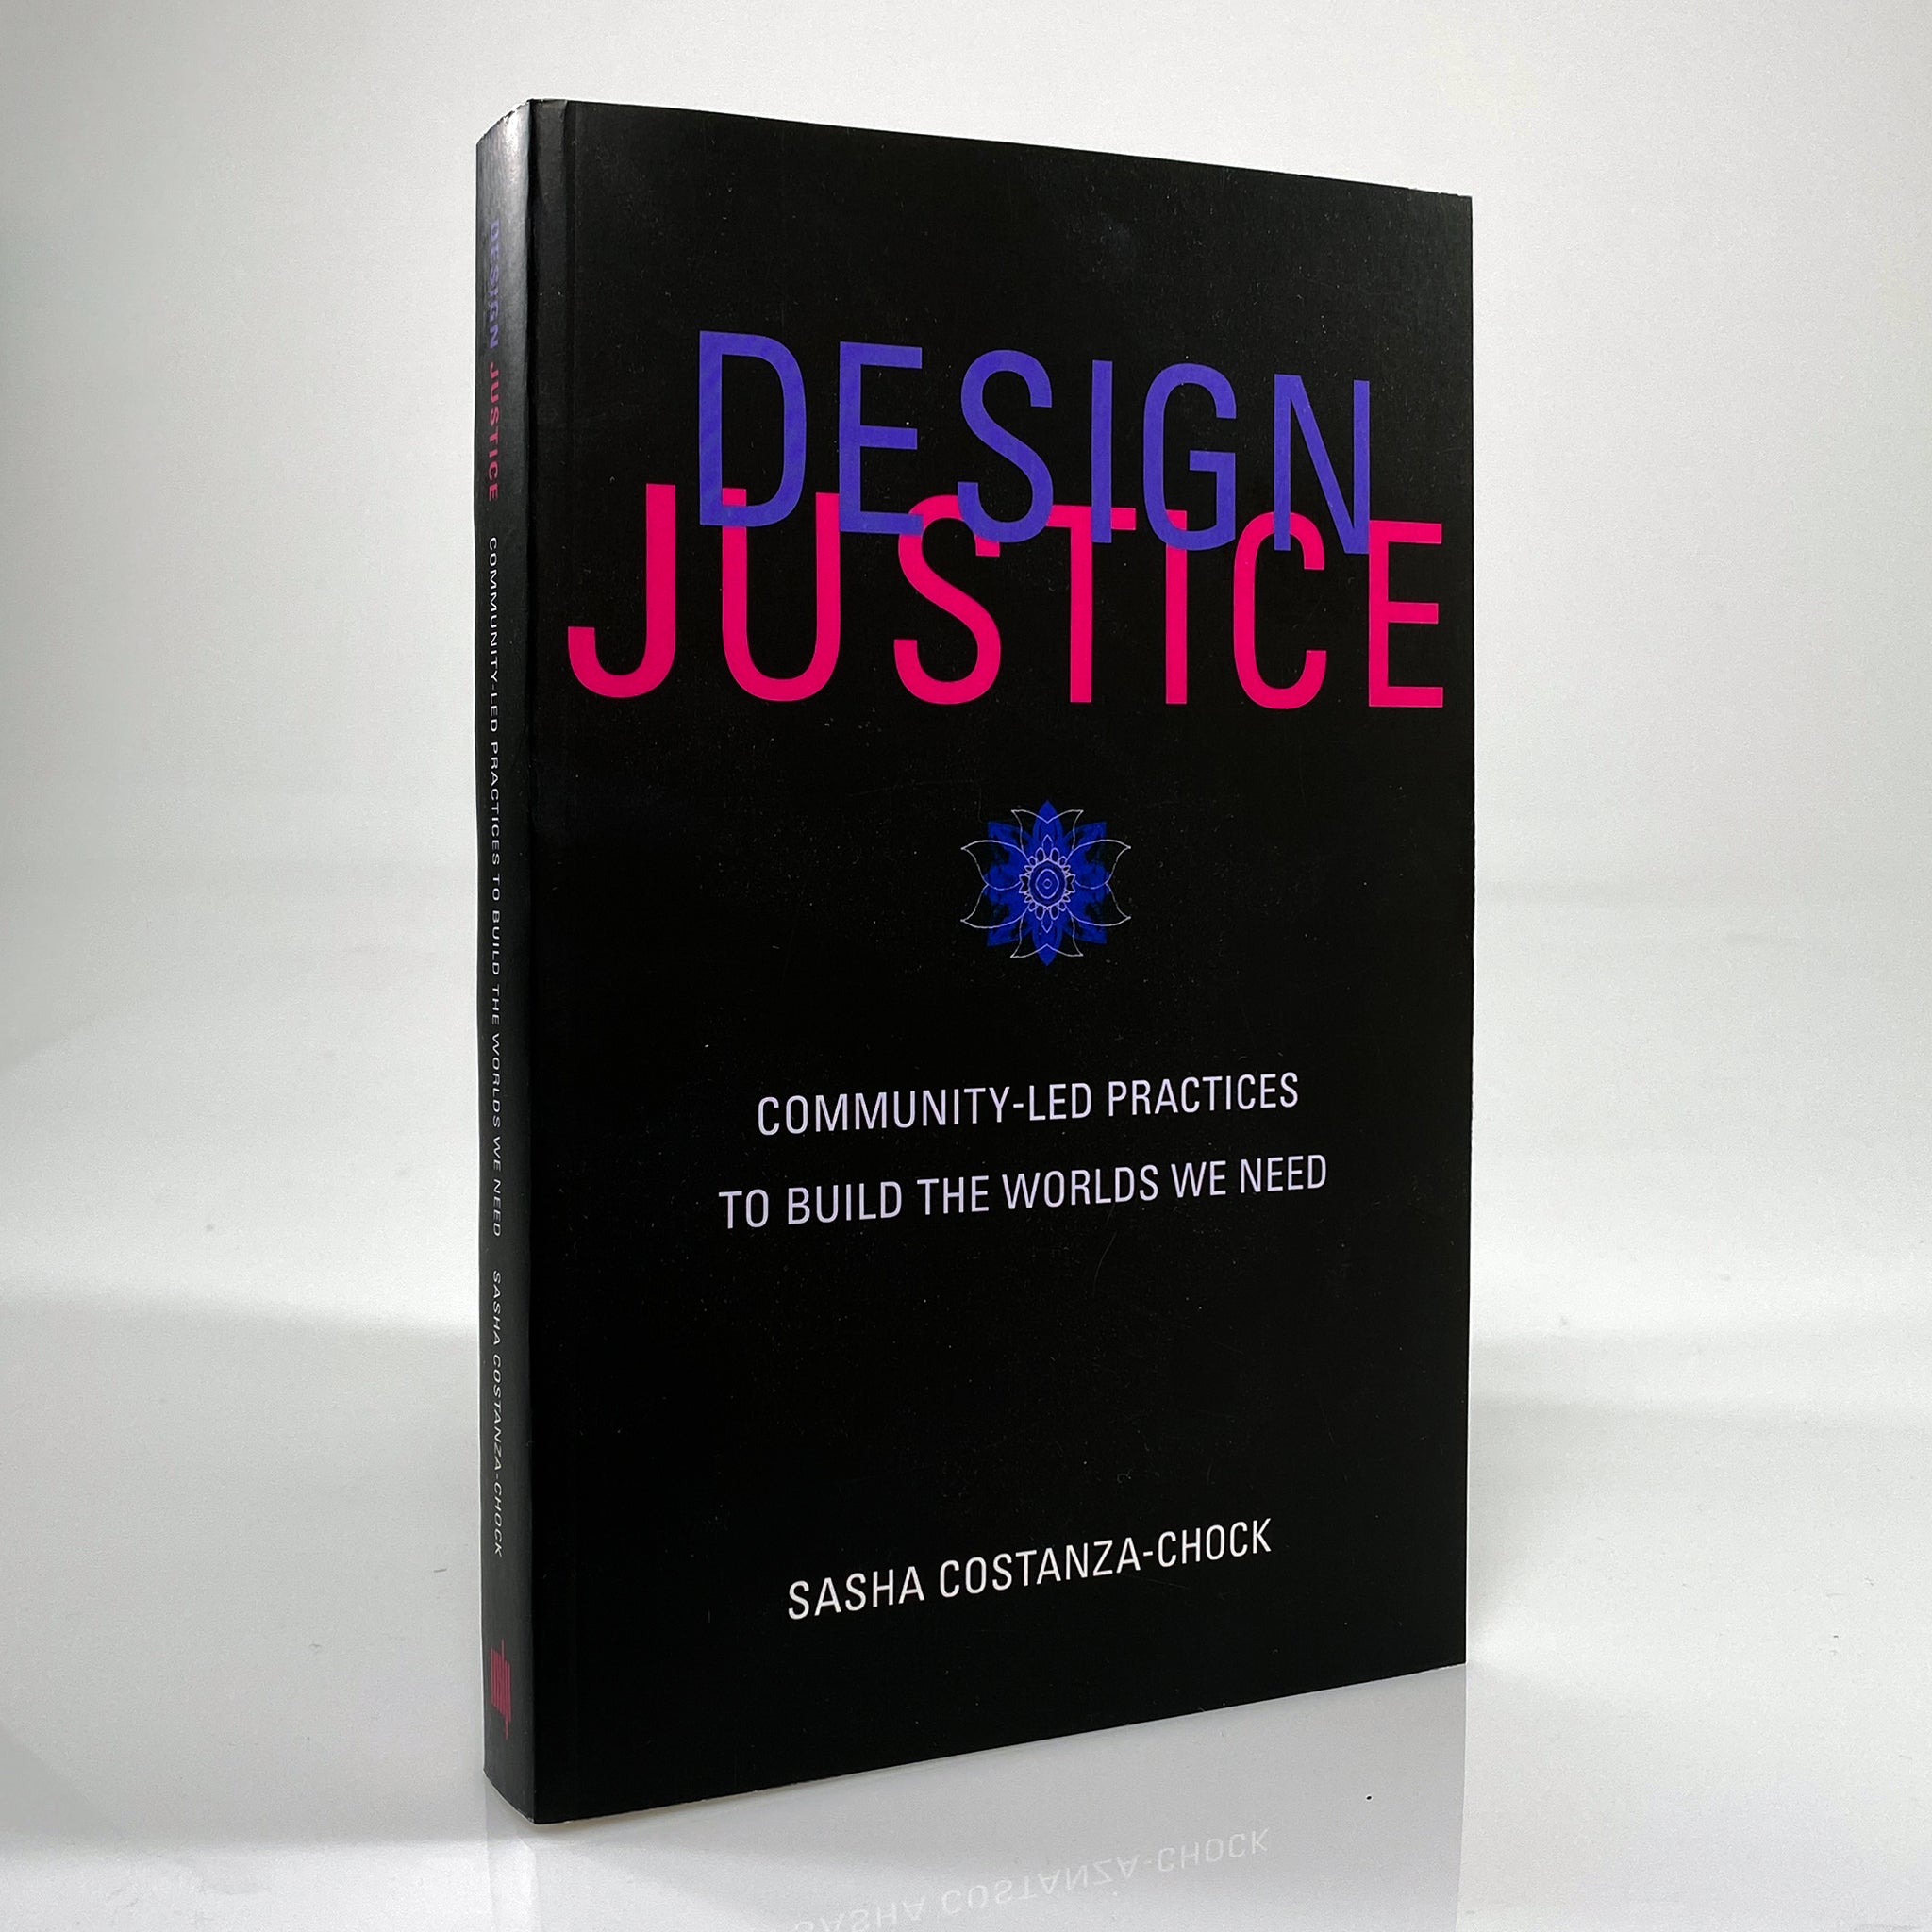 Design Justice: Community-Led Practices to Build the Worlds We Need